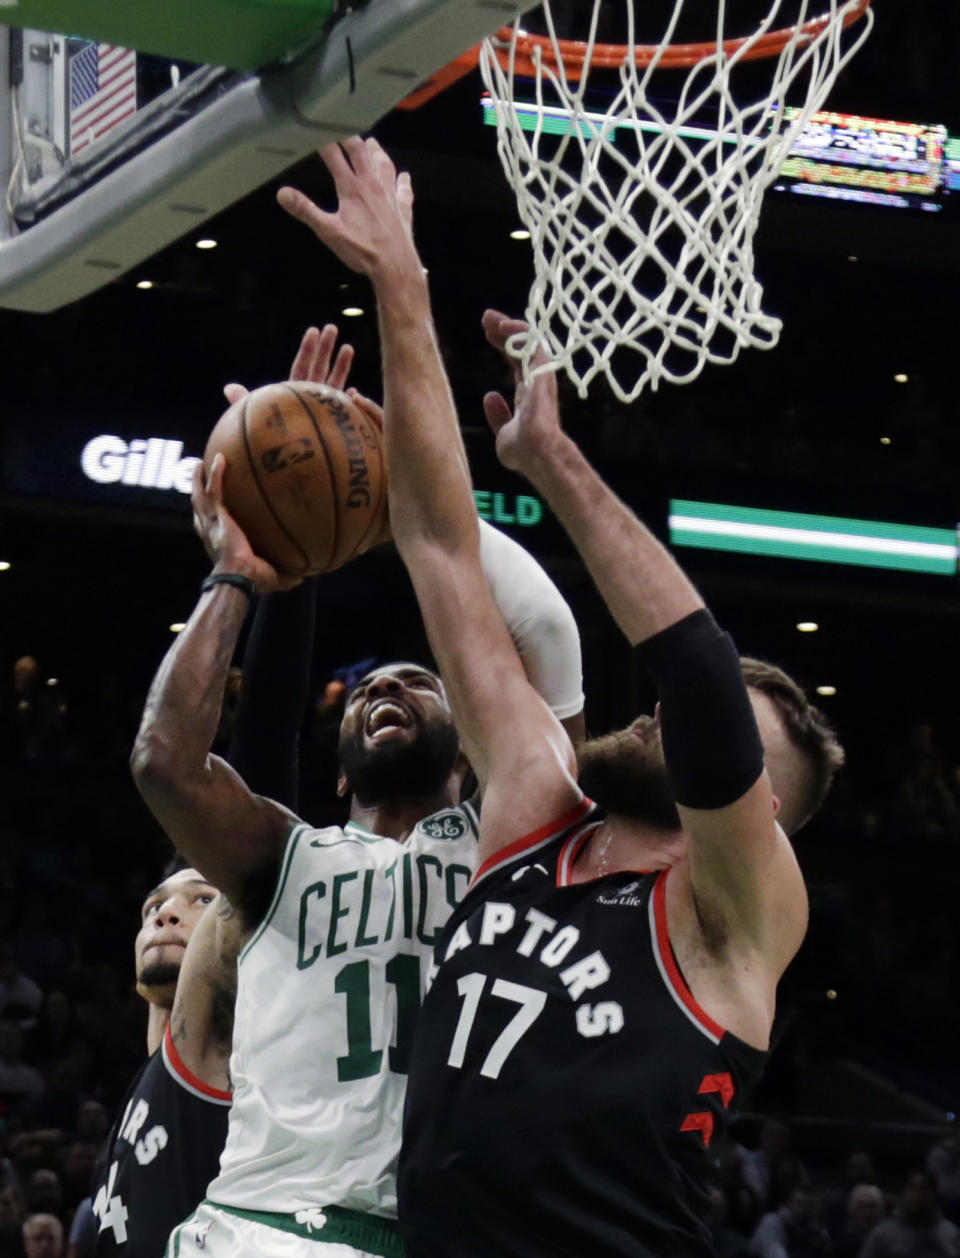 Boston Celtics guard Kyrie Irving (11) scores against Toronto Raptors center Jonas Valanciunas (17) in the fourth quarter of an NBA basketball game, Friday, Nov. 16, 2018, in Boston. Irving totaled 43 points to lead the Celtics to a 123-116 victory in overtime. (AP Photo/Elise Amendola)